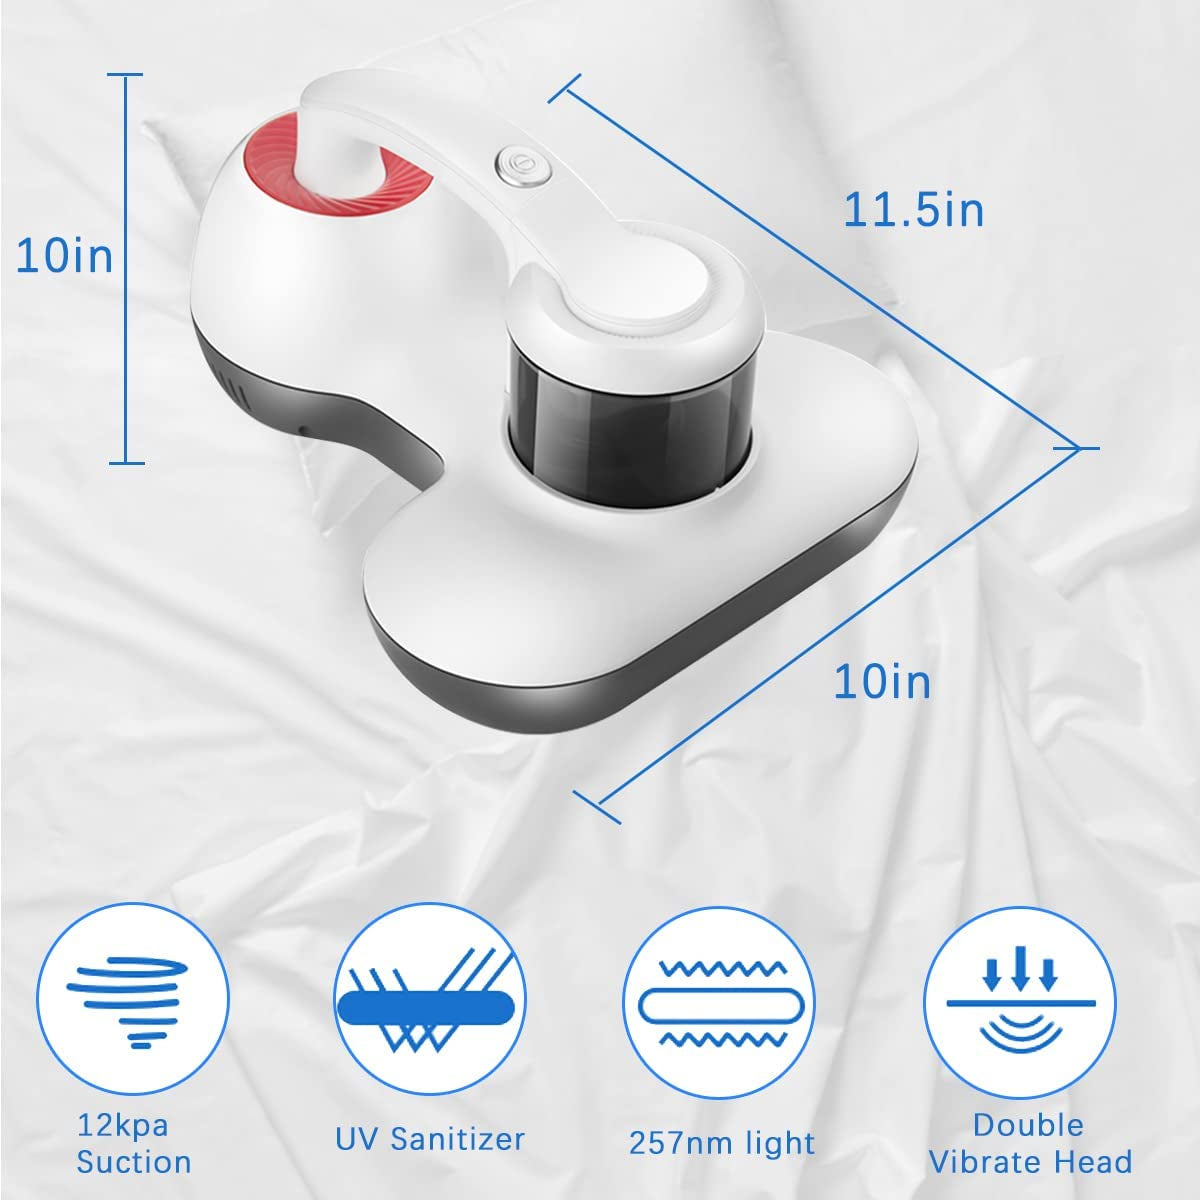 Mattress Vacuum Cleaner, UV Bed Cleaner 12Kpa Handheld Upgraded Effectively Clean up Bed, Pillows, Cloth Sofas, Carpets and Ther Fabric Surfaces